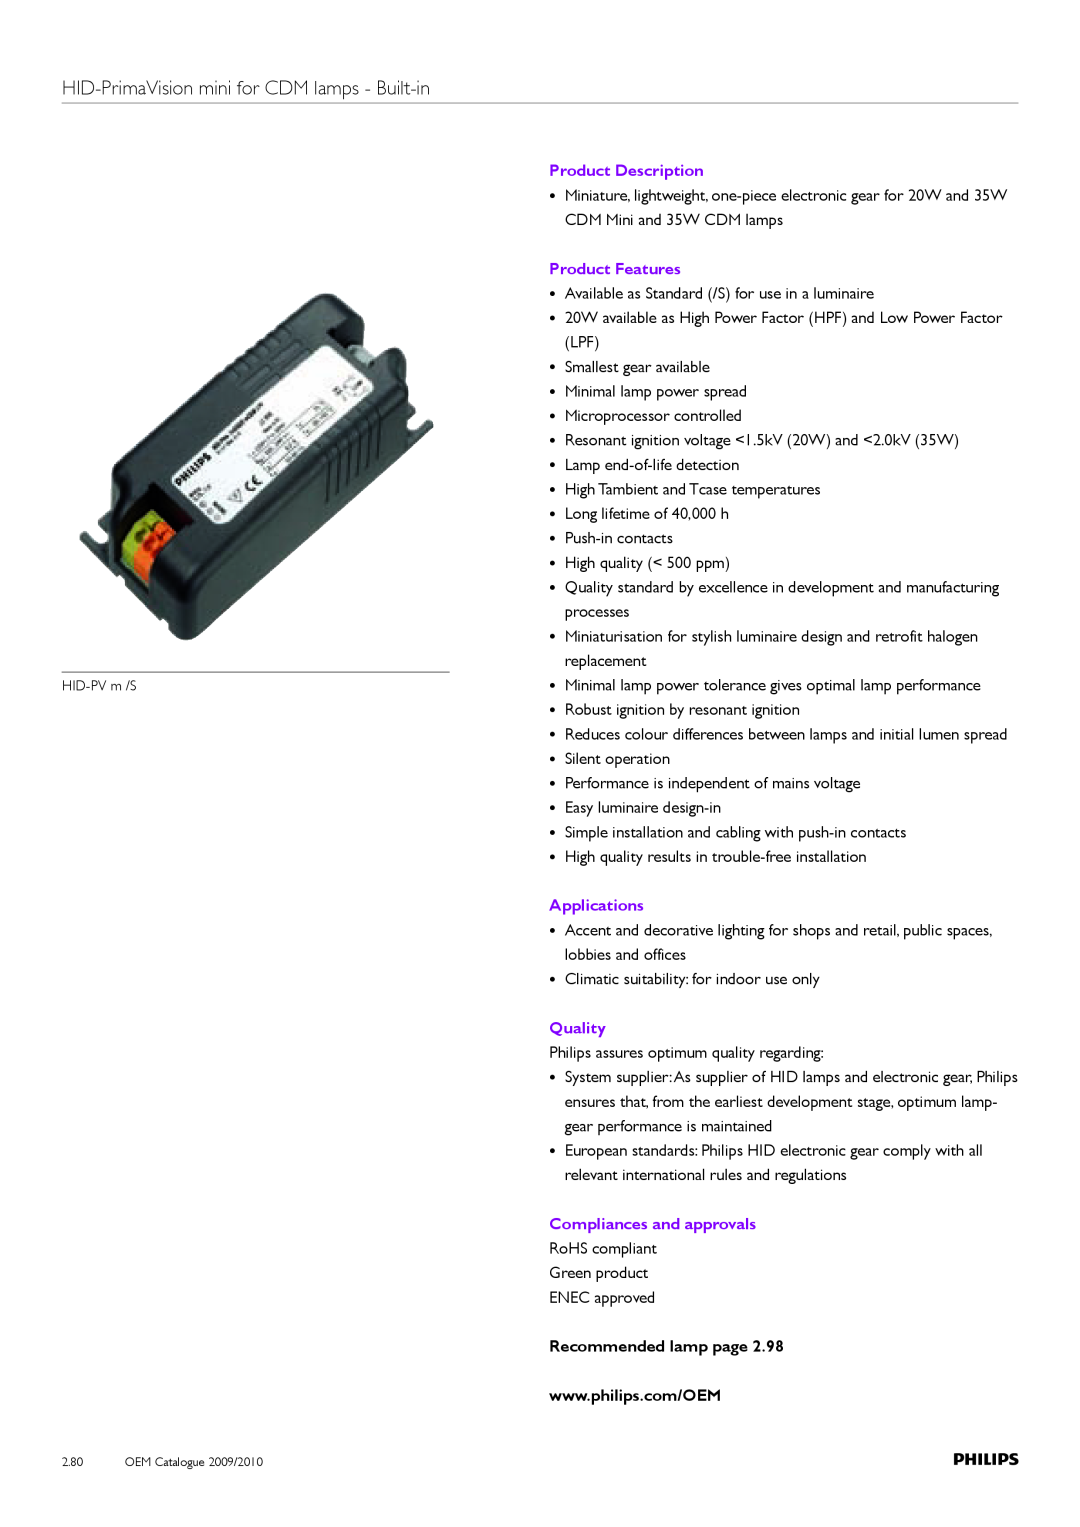 Philips Compact HID Lamp and Gear HID-PrimaVisionmini for CDM lamps - Built-in, Product Description, Product Features 